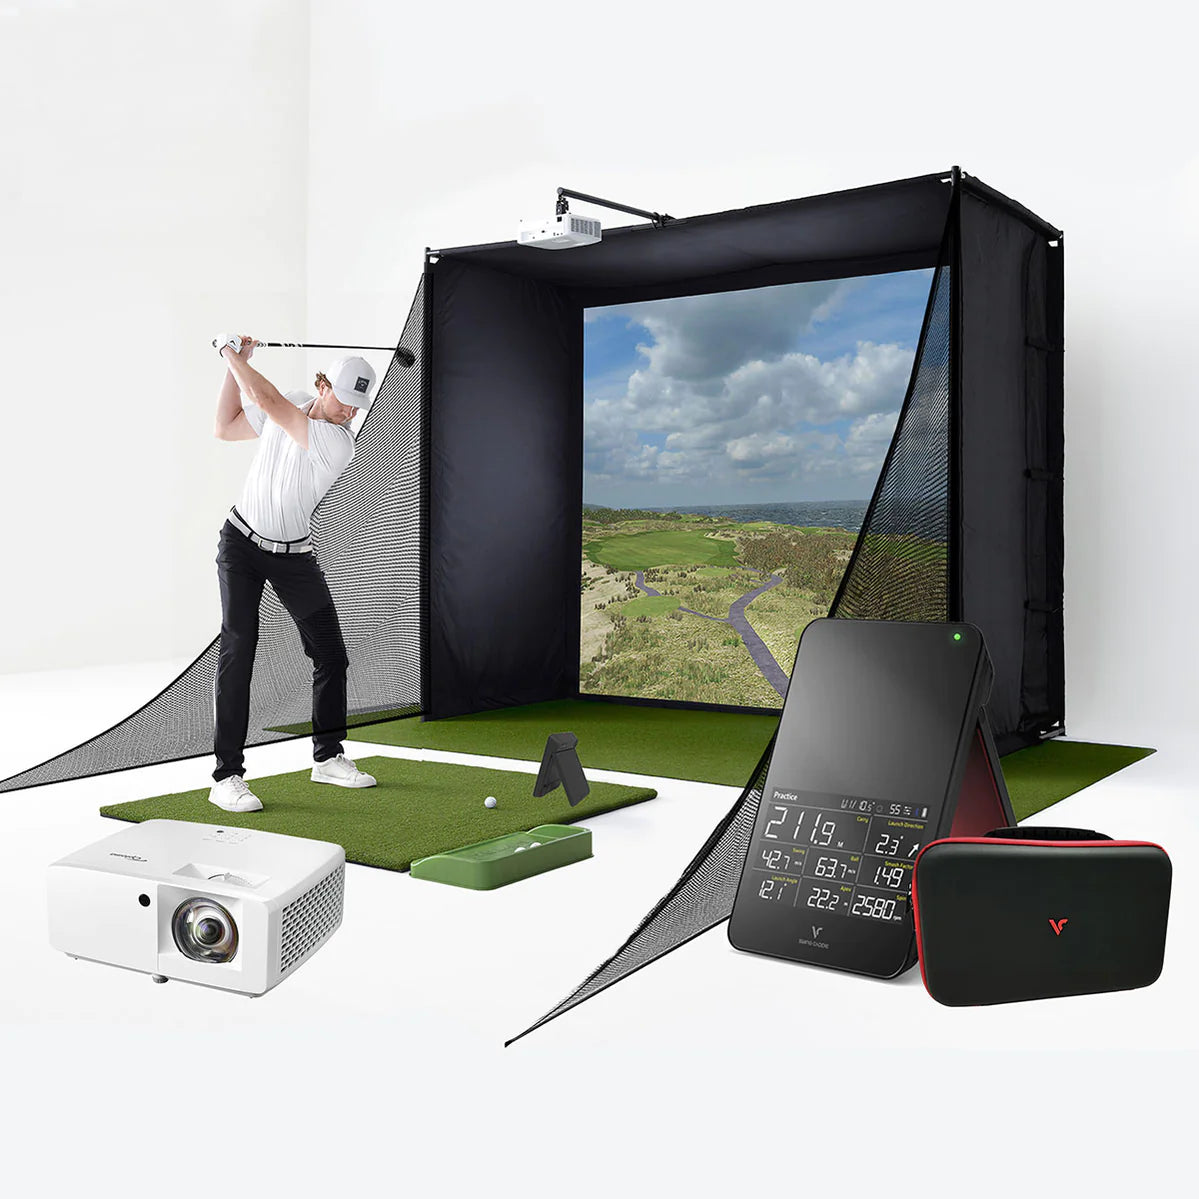 A golfer getting ready to swing PlayBetter SimStudio setup with an SC4 unit, and a projector, SC4 unit, and carrying case in the foreground